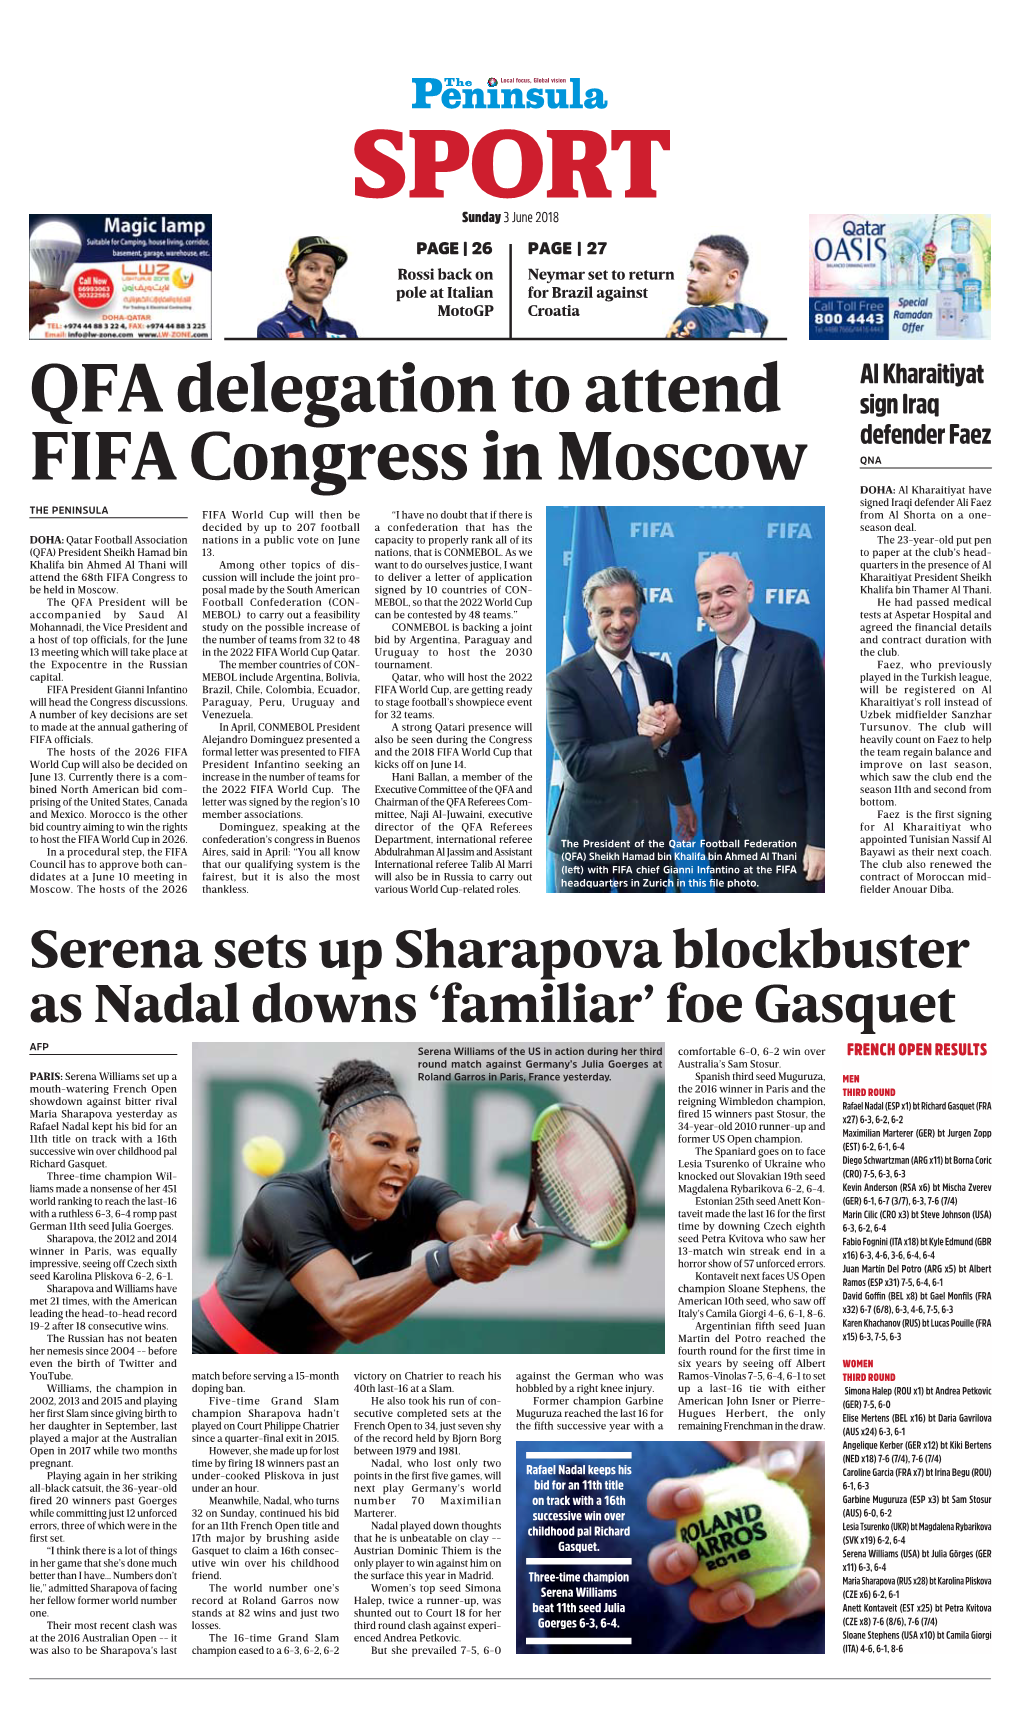 QFA Delegation to Attend FIFA Congress in Moscow